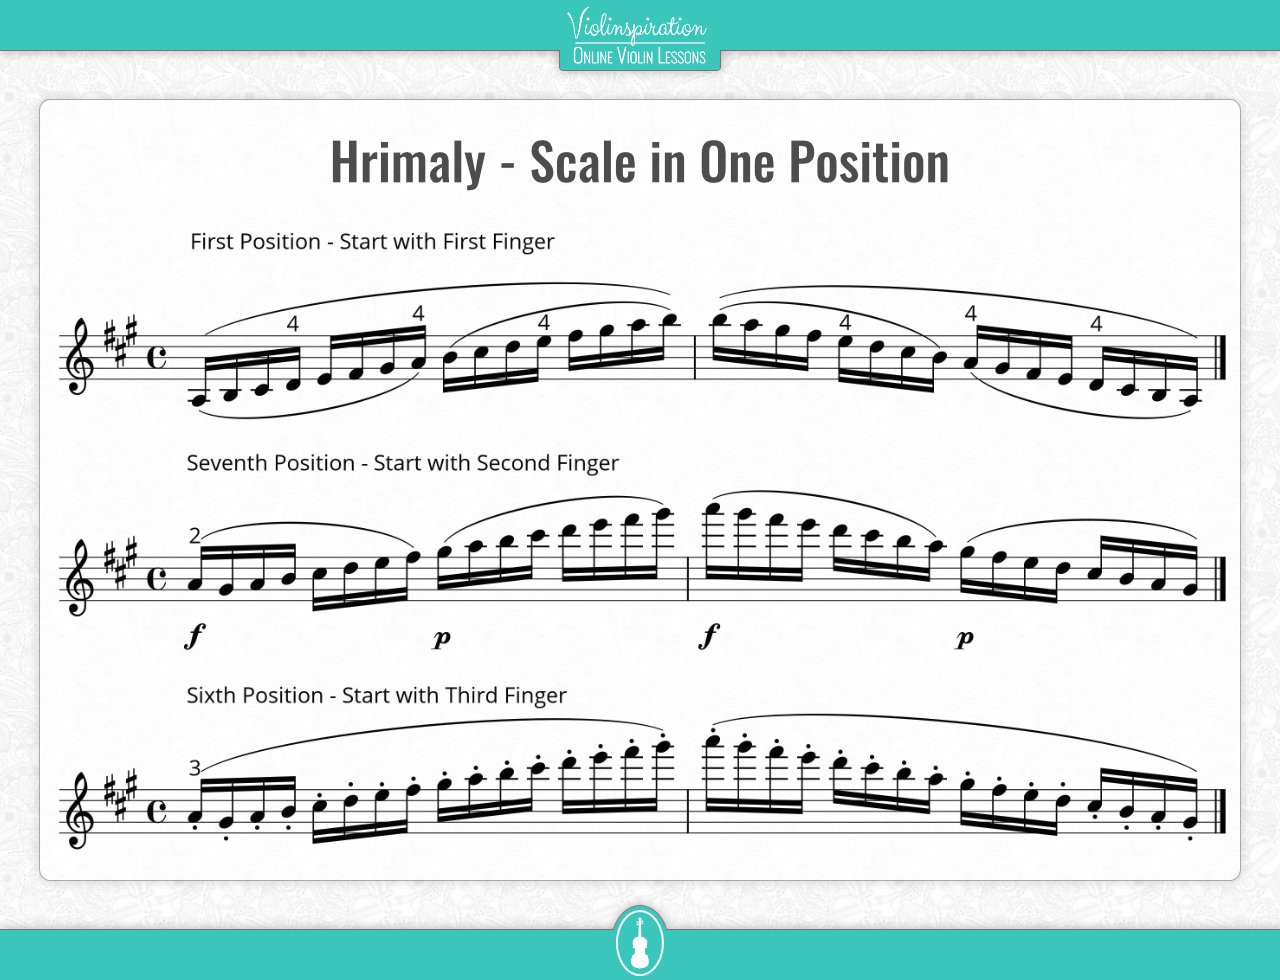 Advanced Violin Exercises - Hrimaly - scale in one position